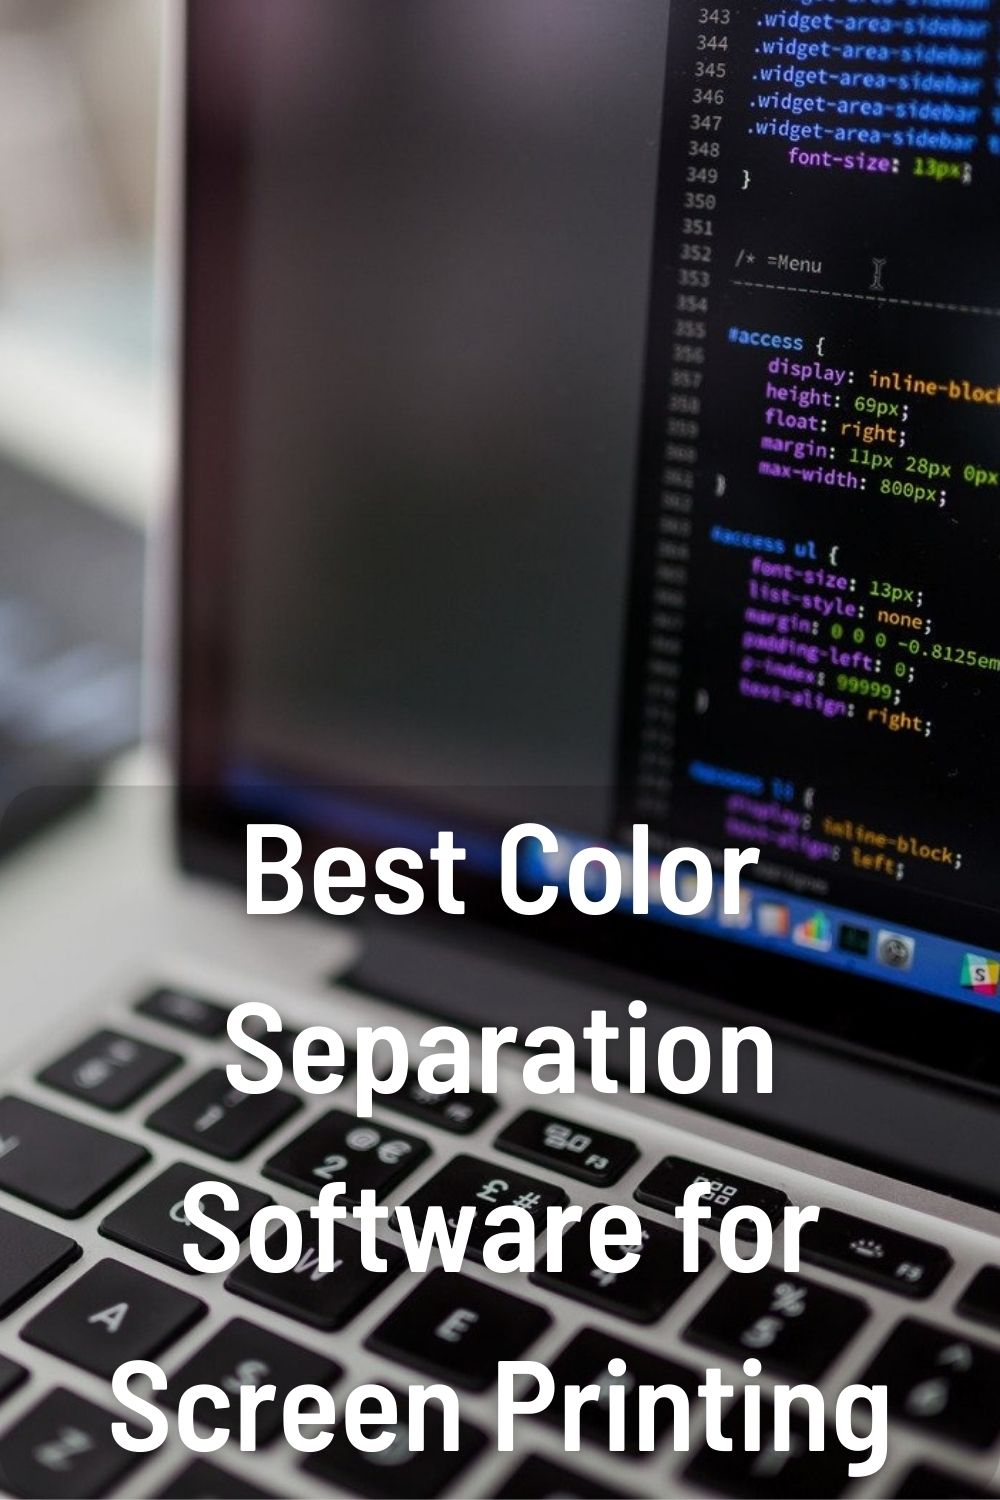 Best Color Separation Software for Screen Printing